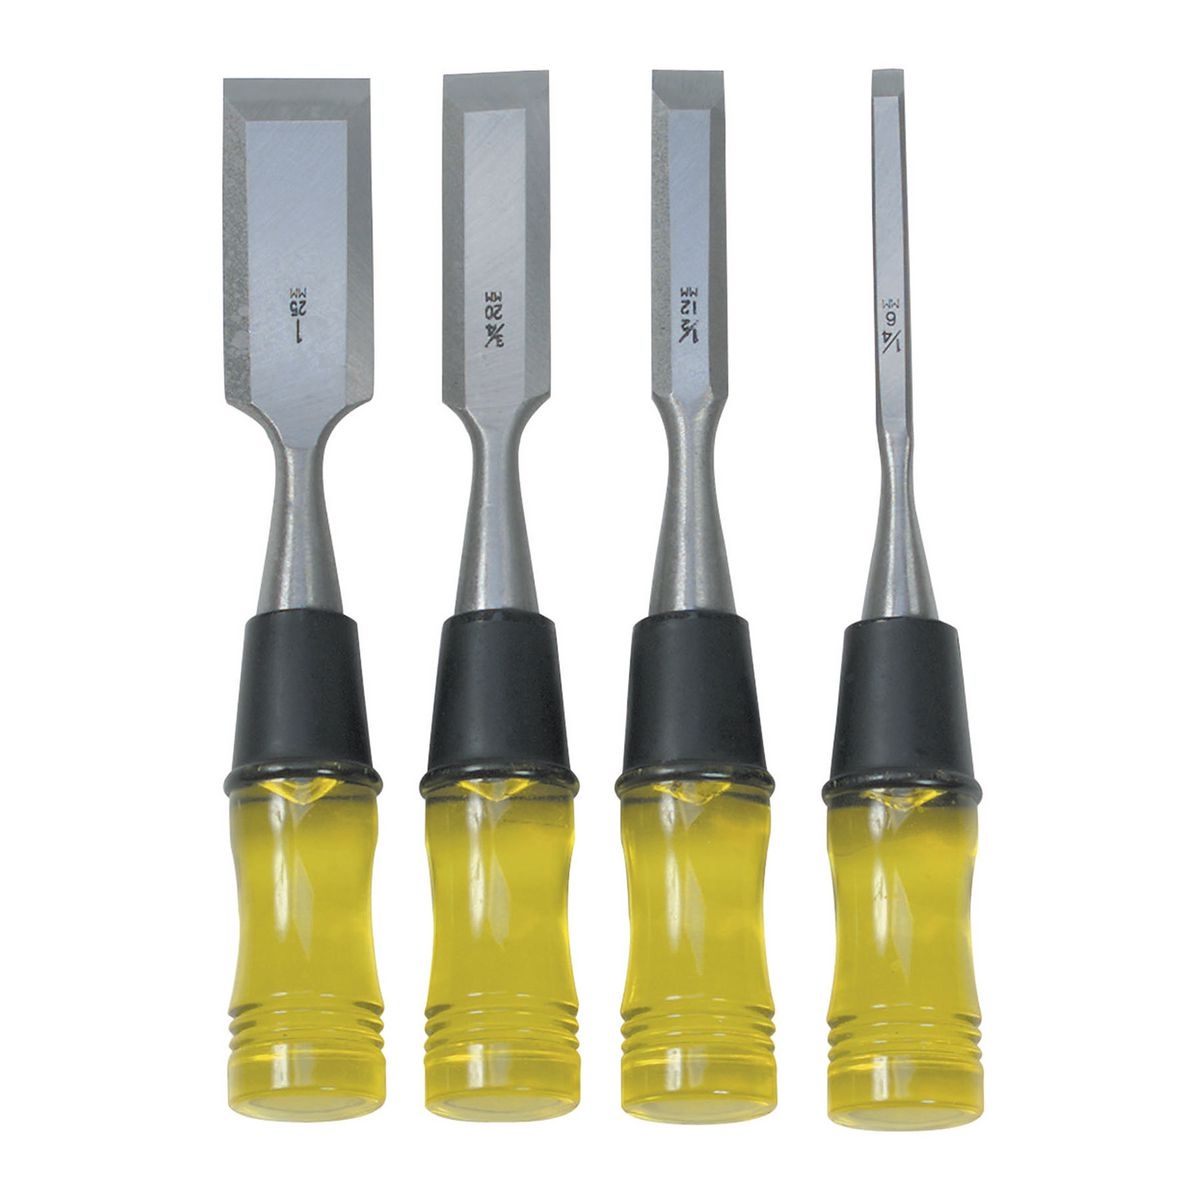 PITTSBURGH Wood Chisel Set with Clear PVC Handle 4 Pc. - Item 69471 / 42429